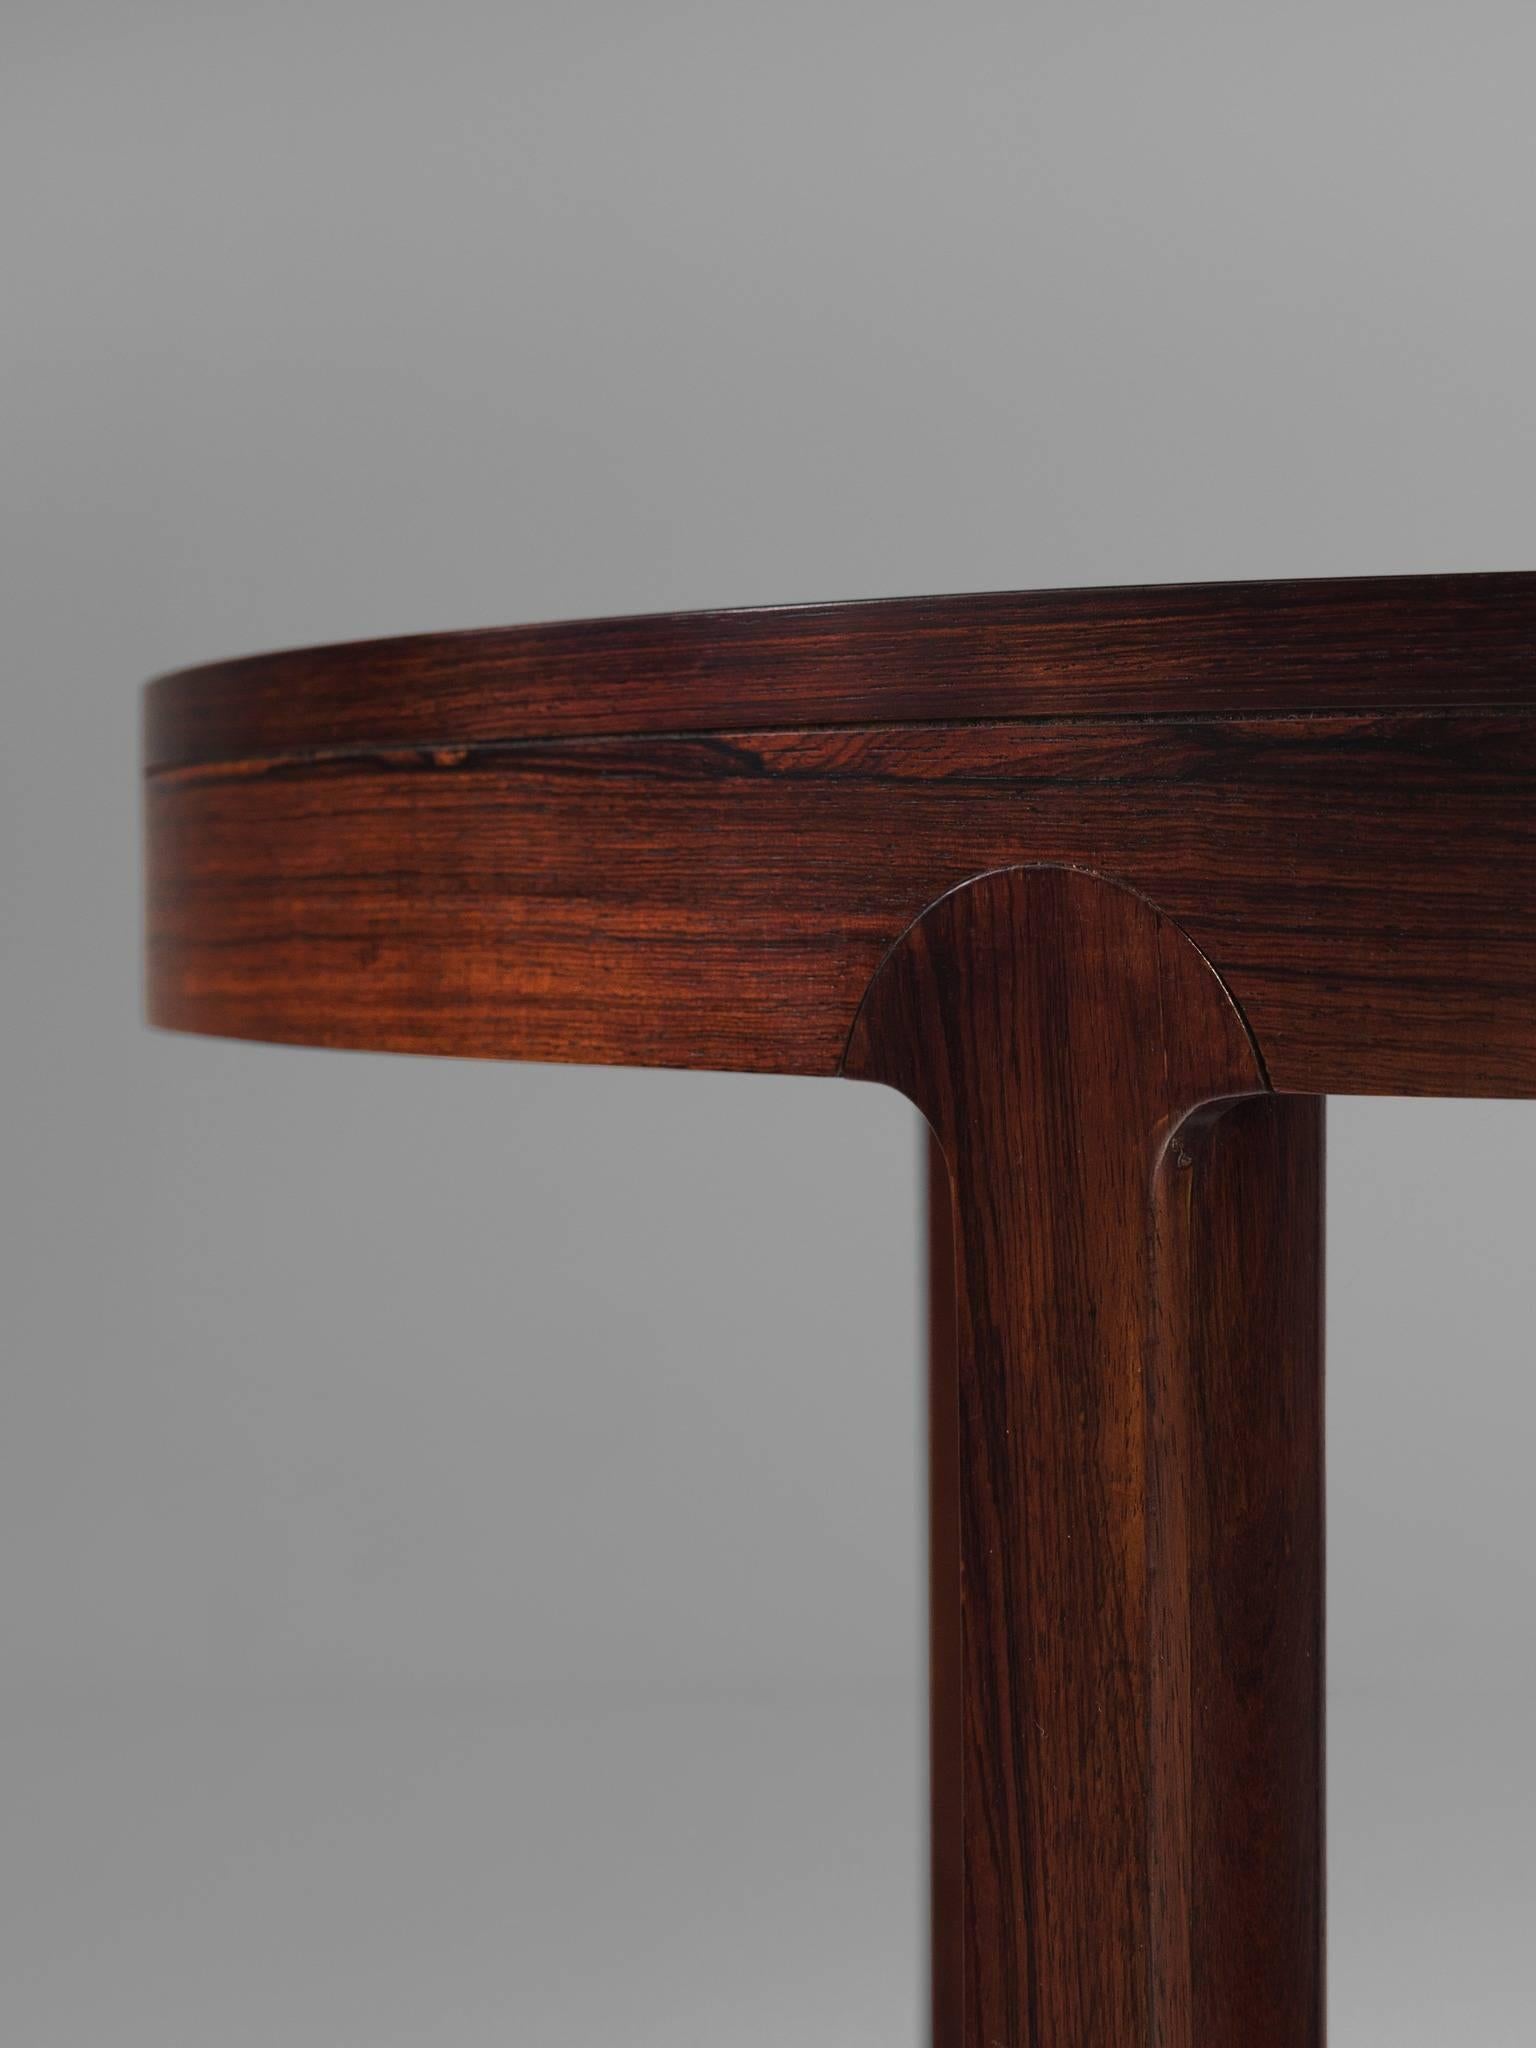 Unique Rosewood Table by Danish Master Cabinet Maker 3